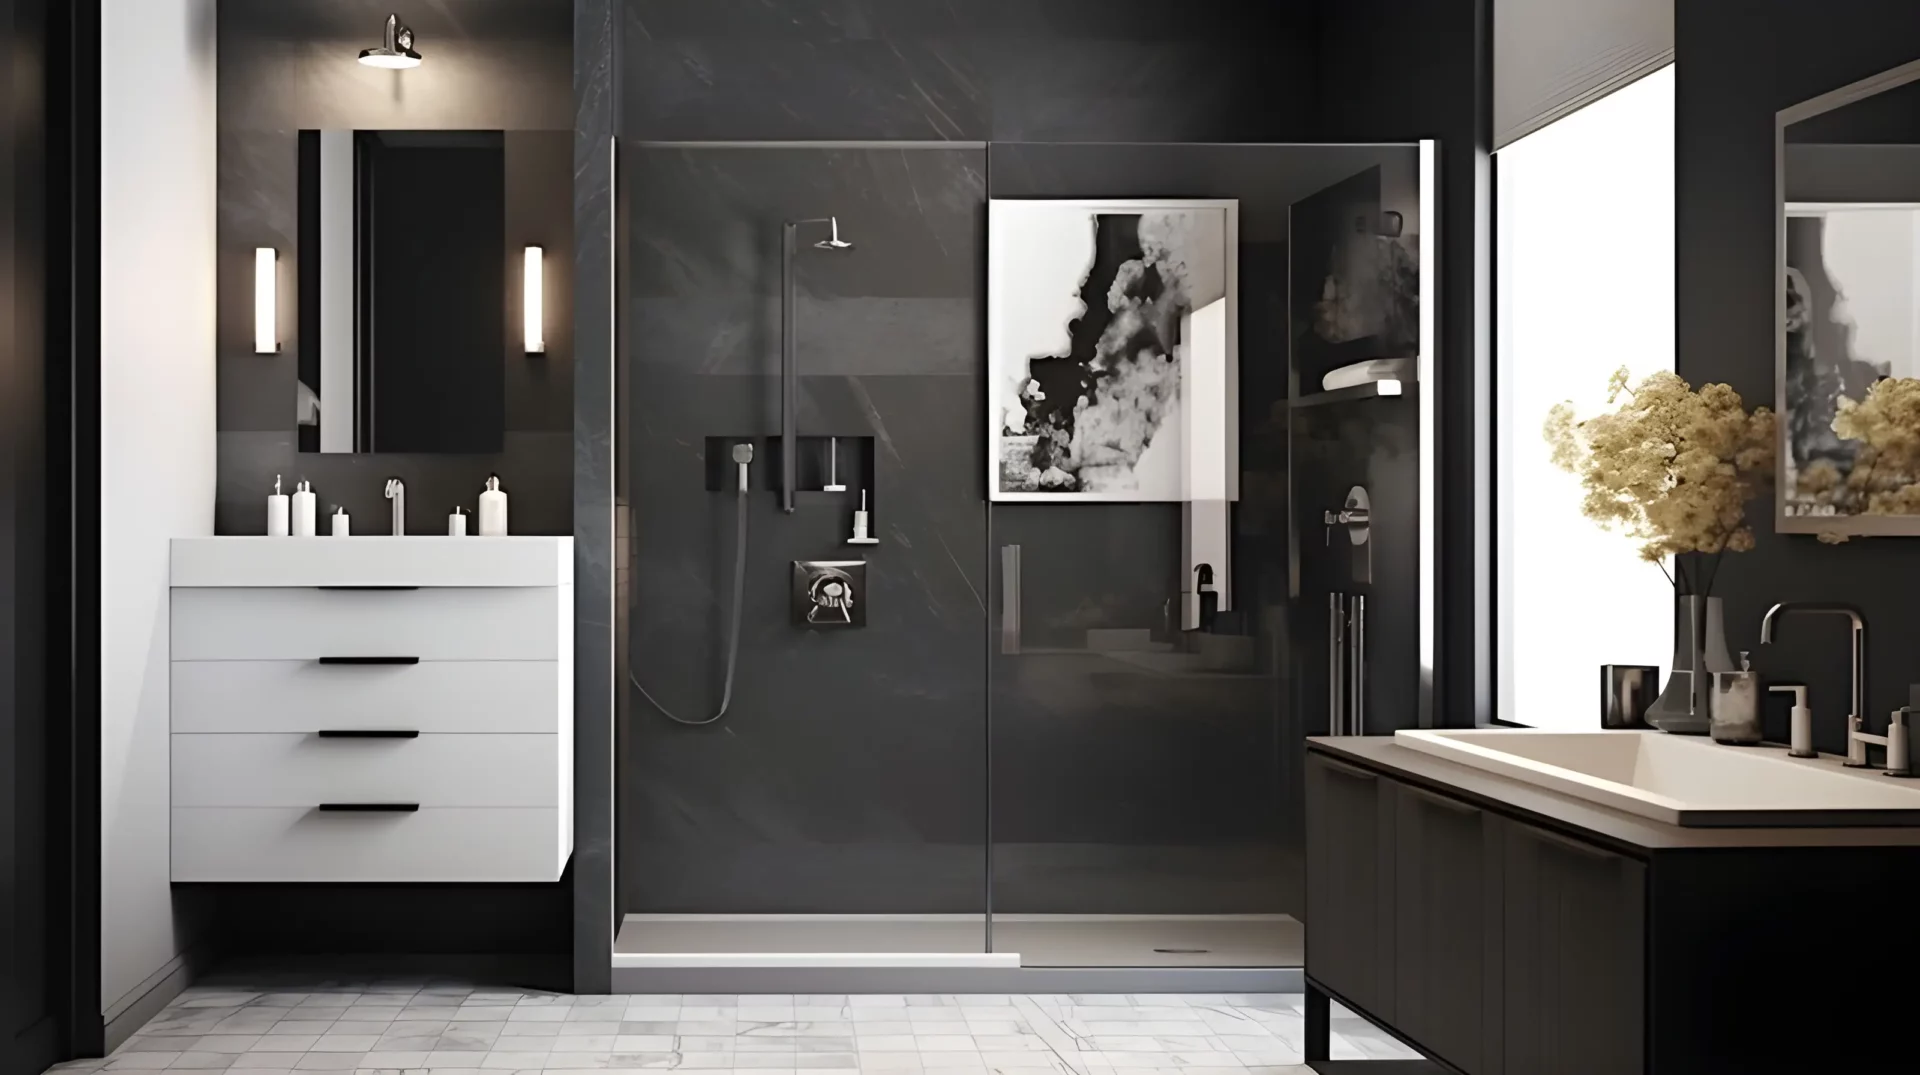 A black and white bathroom with a shower stall.